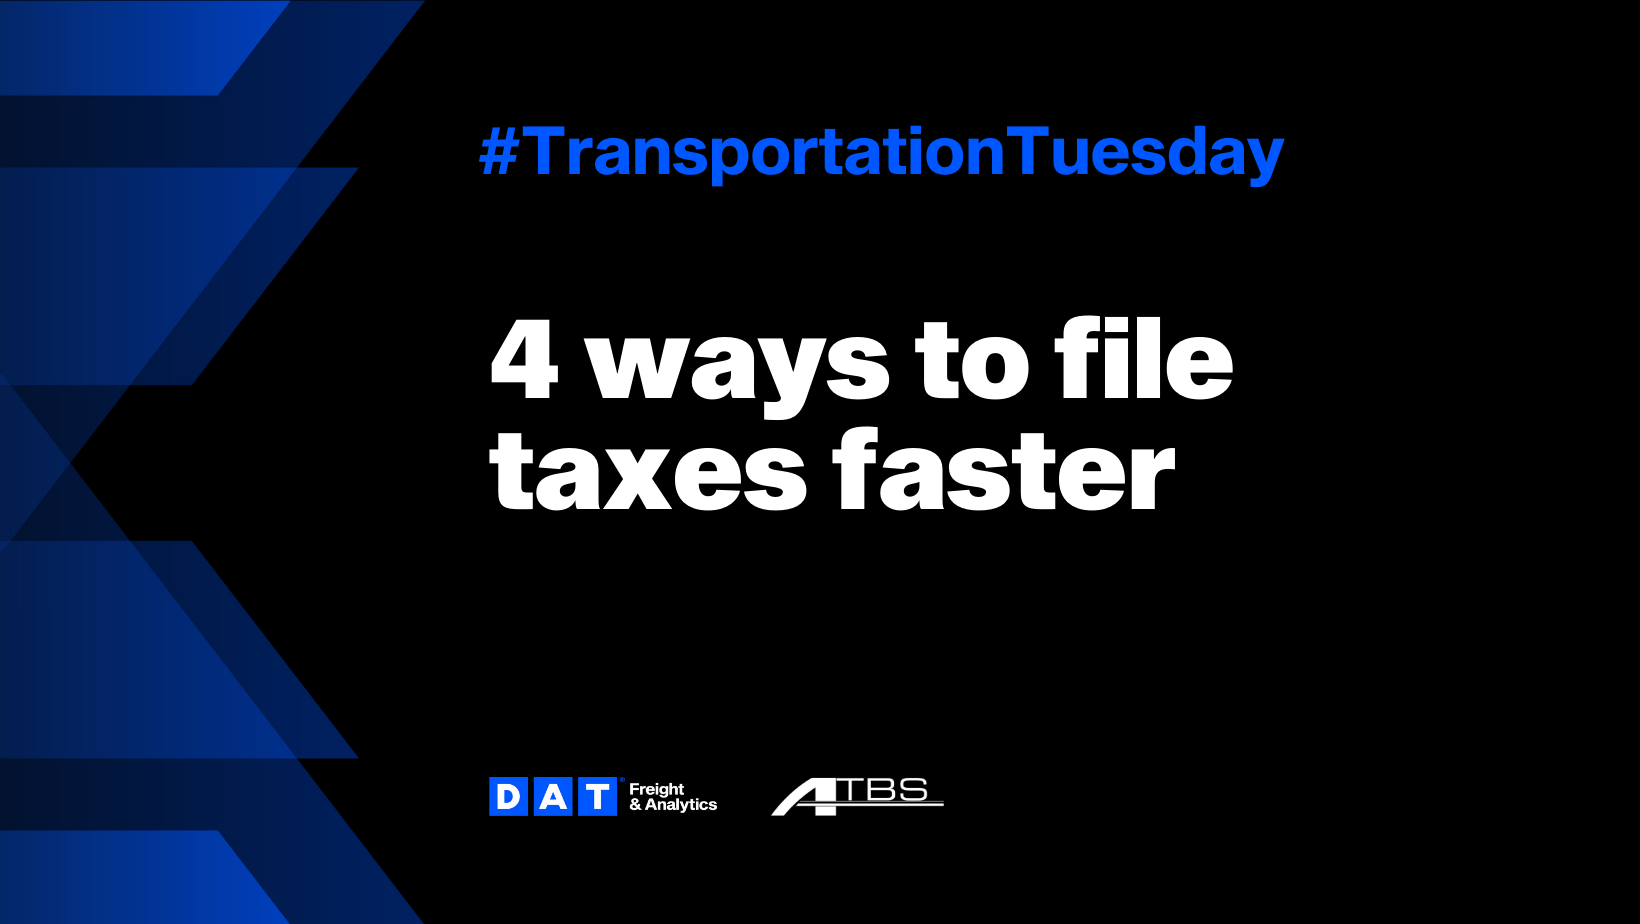 Transportation Tuesday Tip #12: 4 ways to file taxes faster